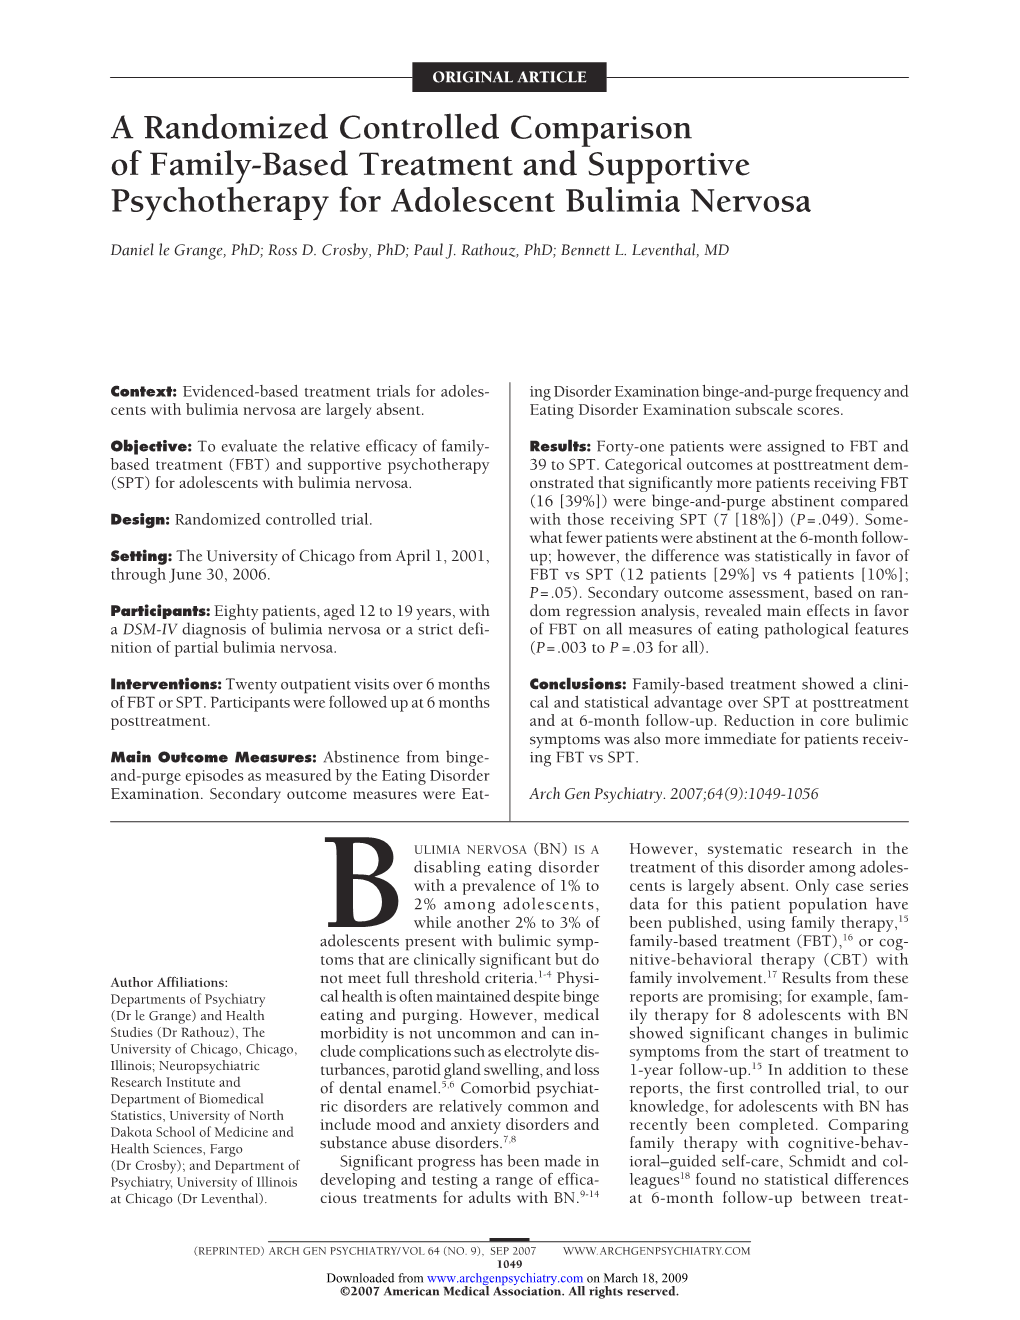 A Randomized Controlled Comparison of Family-Based Treatment and Supportive Psychotherapy for Adolescent Bulimia Nervosa